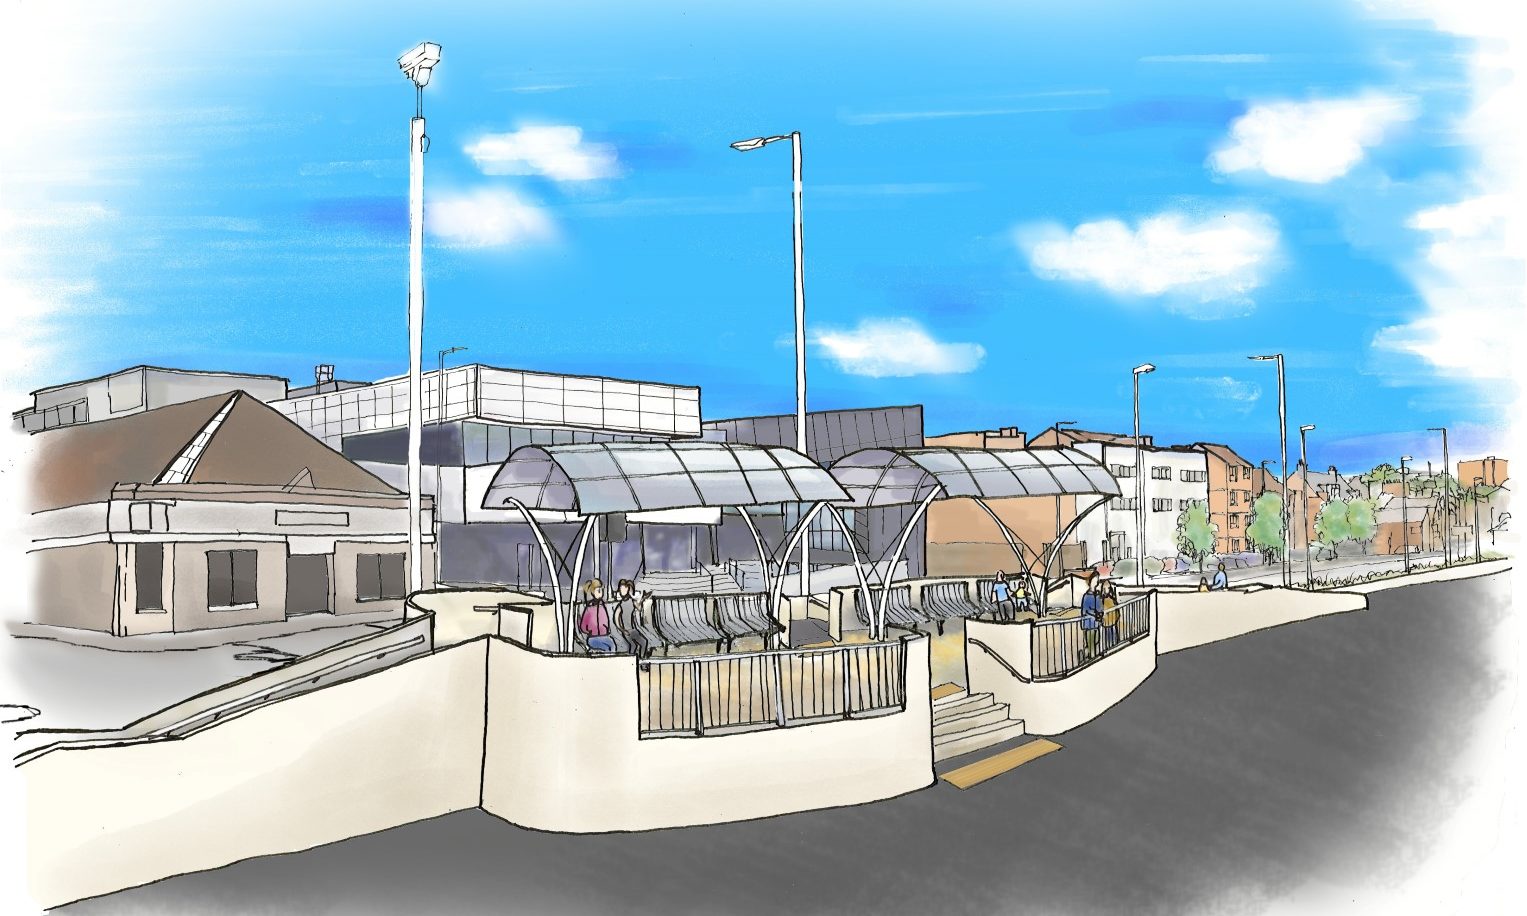 How one of the Kirkcaldy Esplanade viewing platforms could look as part of the waterfront regeneration